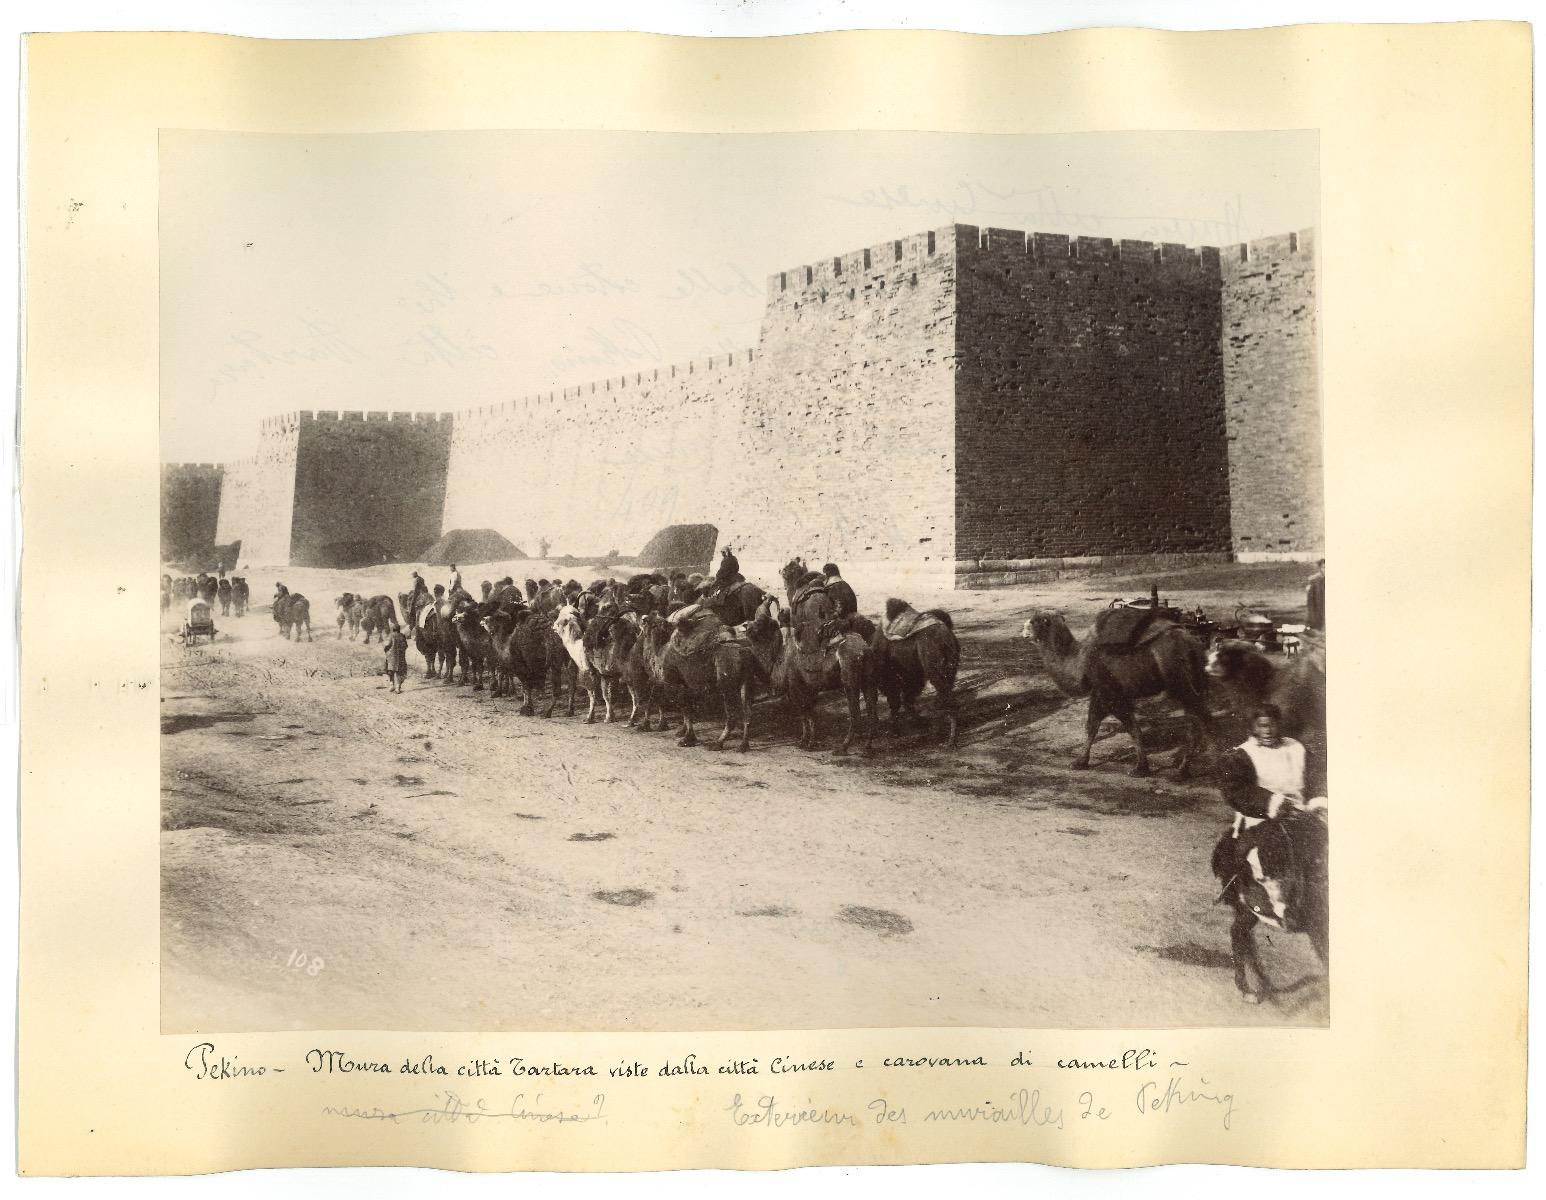 Unknown Figurative Photograph - Walls and Fortification in Beijin - Original Albumen Print - 1880/90s